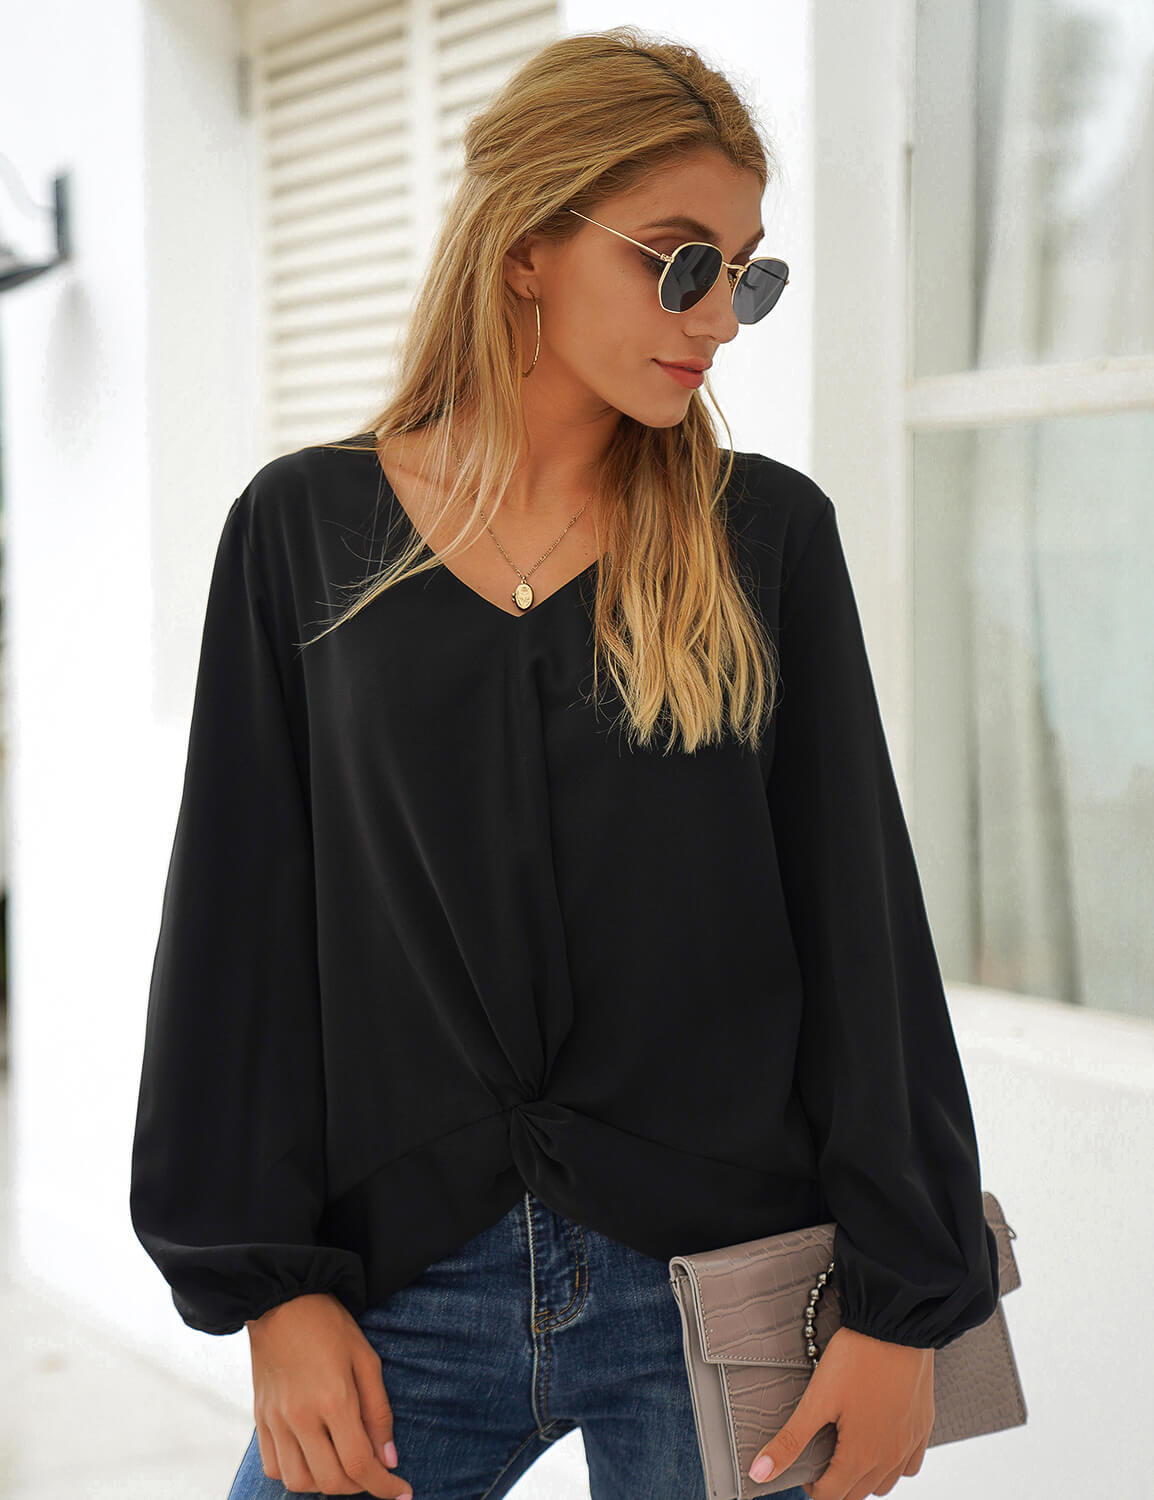 Blooming Jelly_Street Style Puff Sleeve Black Blouse_Black_156254_02_Stylish Women Casual Outfits_Tops_Blouse